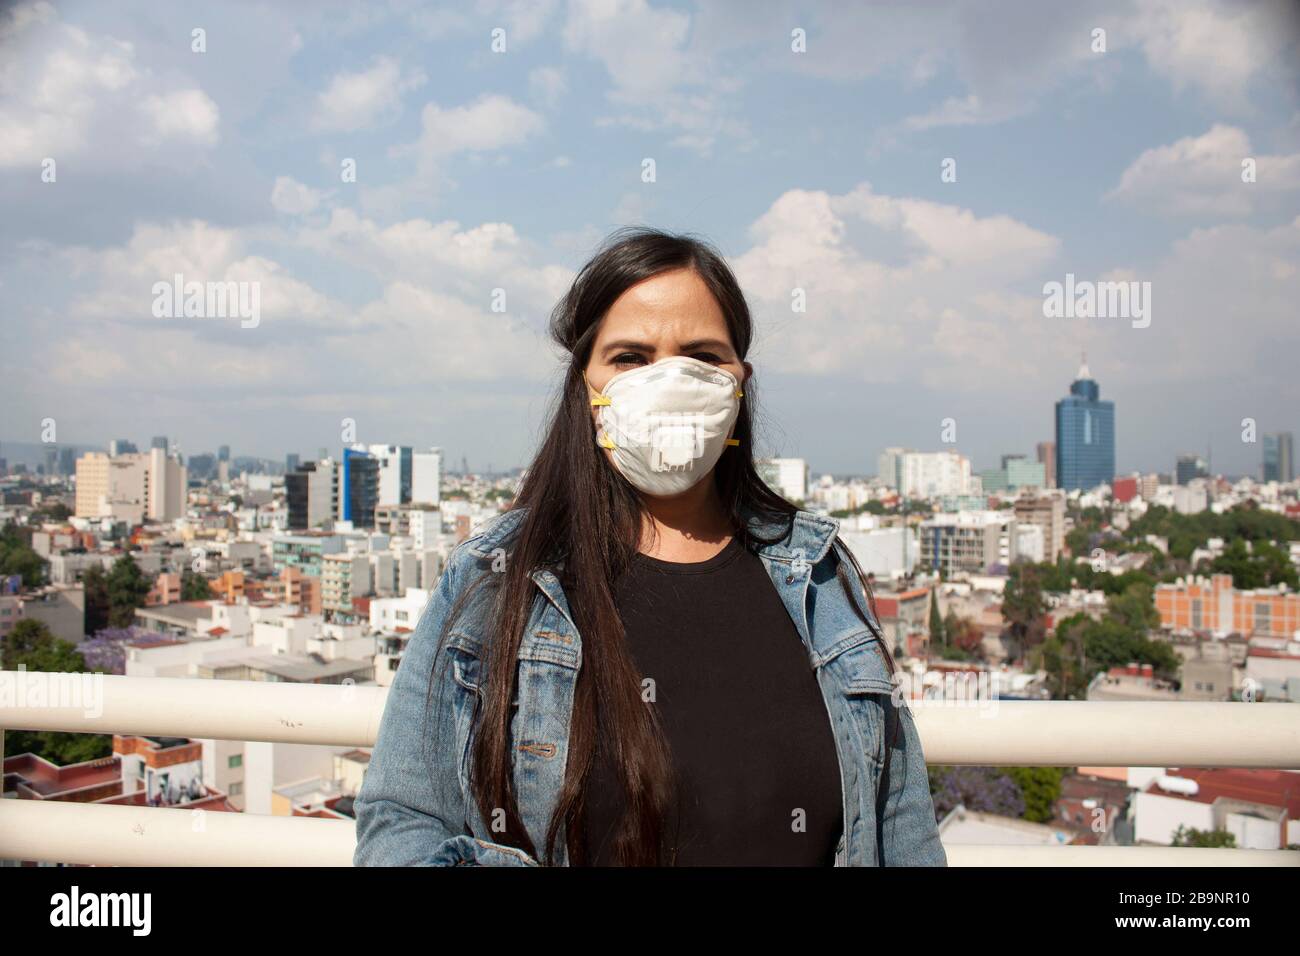 use mask covering nose and mouth for a Mexican woman sick with influenza, coronavirus, bacteria, long hair between 40 and 45 years in Mexico City Stock Photo